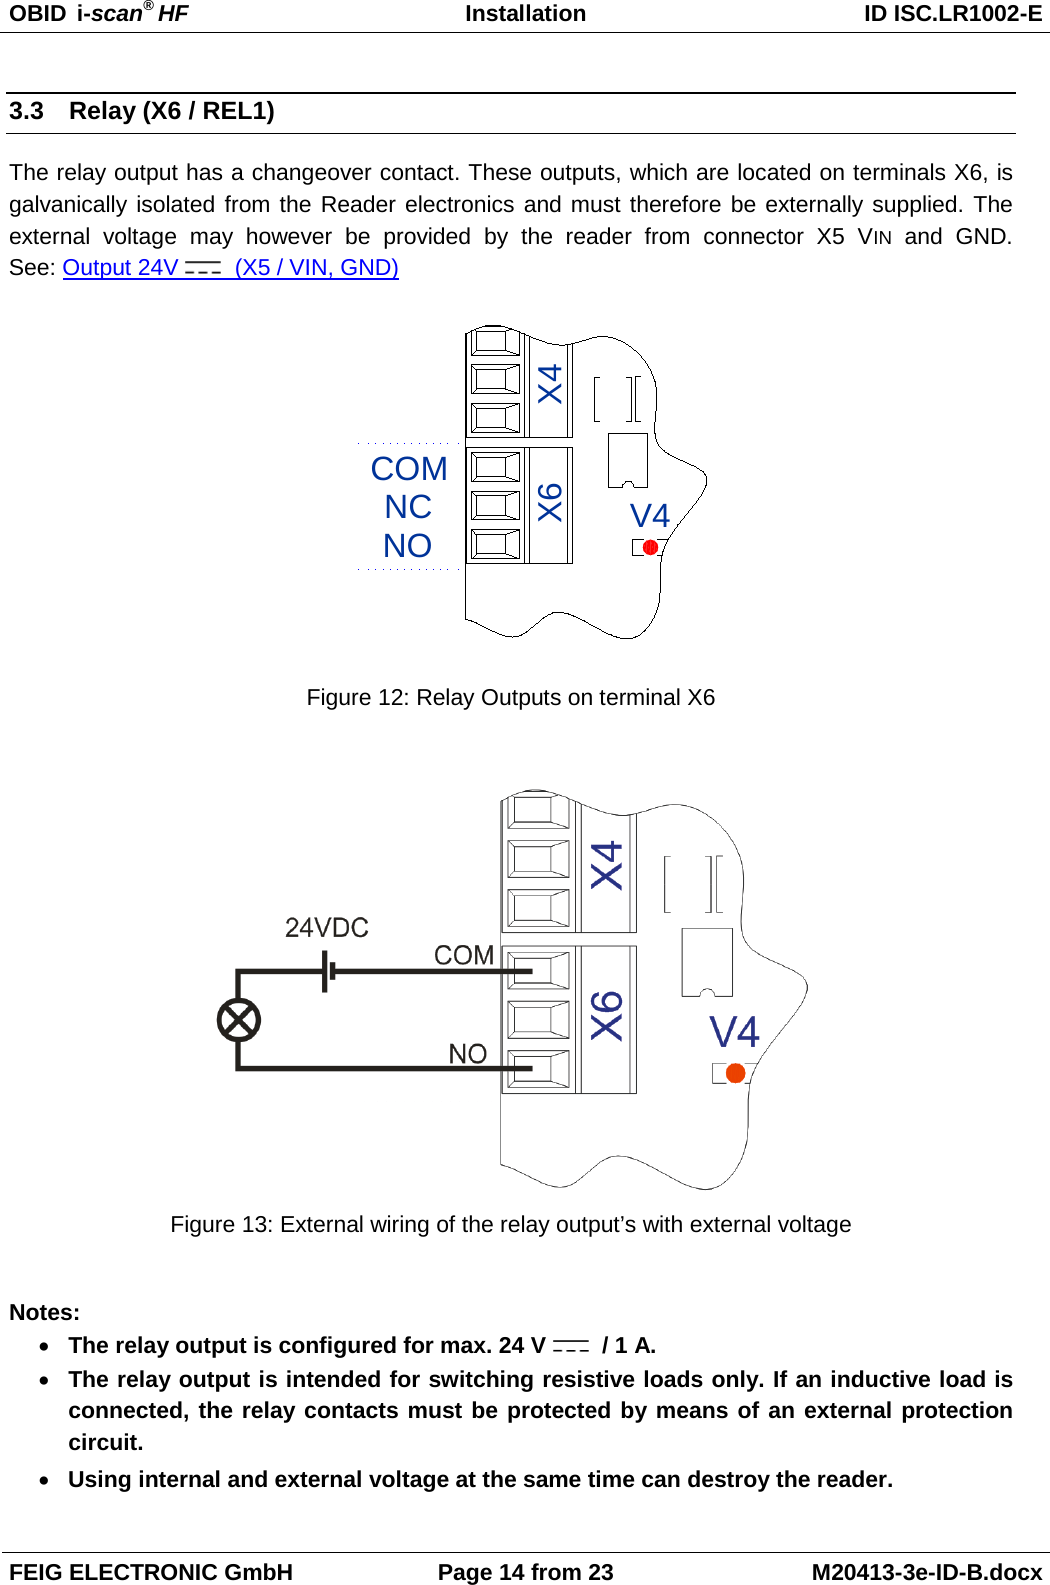 OBID  i-scan® HF Installation ID ISC.LR1002-E  FEIG ELECTRONIC GmbH Page 14 from 23 M20413-3e-ID-B.docx  3.3 Relay (X6 / REL1) The relay output has a changeover contact. These outputs, which are located on terminals X6, is galvanically isolated from the Reader electronics and must therefore be externally supplied. The external voltage may however be provided by the reader from connector X5 VIN and GND.  See: Output 24V    (X5 / VIN, GND) V4NONCCOMX4X6 Figure 12: Relay Outputs on terminal X6   Figure 13: External wiring of the relay output’s with external voltage  Notes: • The relay output is configured for max. 24 V    / 1 A. • The relay output is intended for switching resistive loads only. If an inductive load is connected, the relay contacts must be protected by means of an external protection circuit. • Using internal and external voltage at the same time can destroy the reader. 